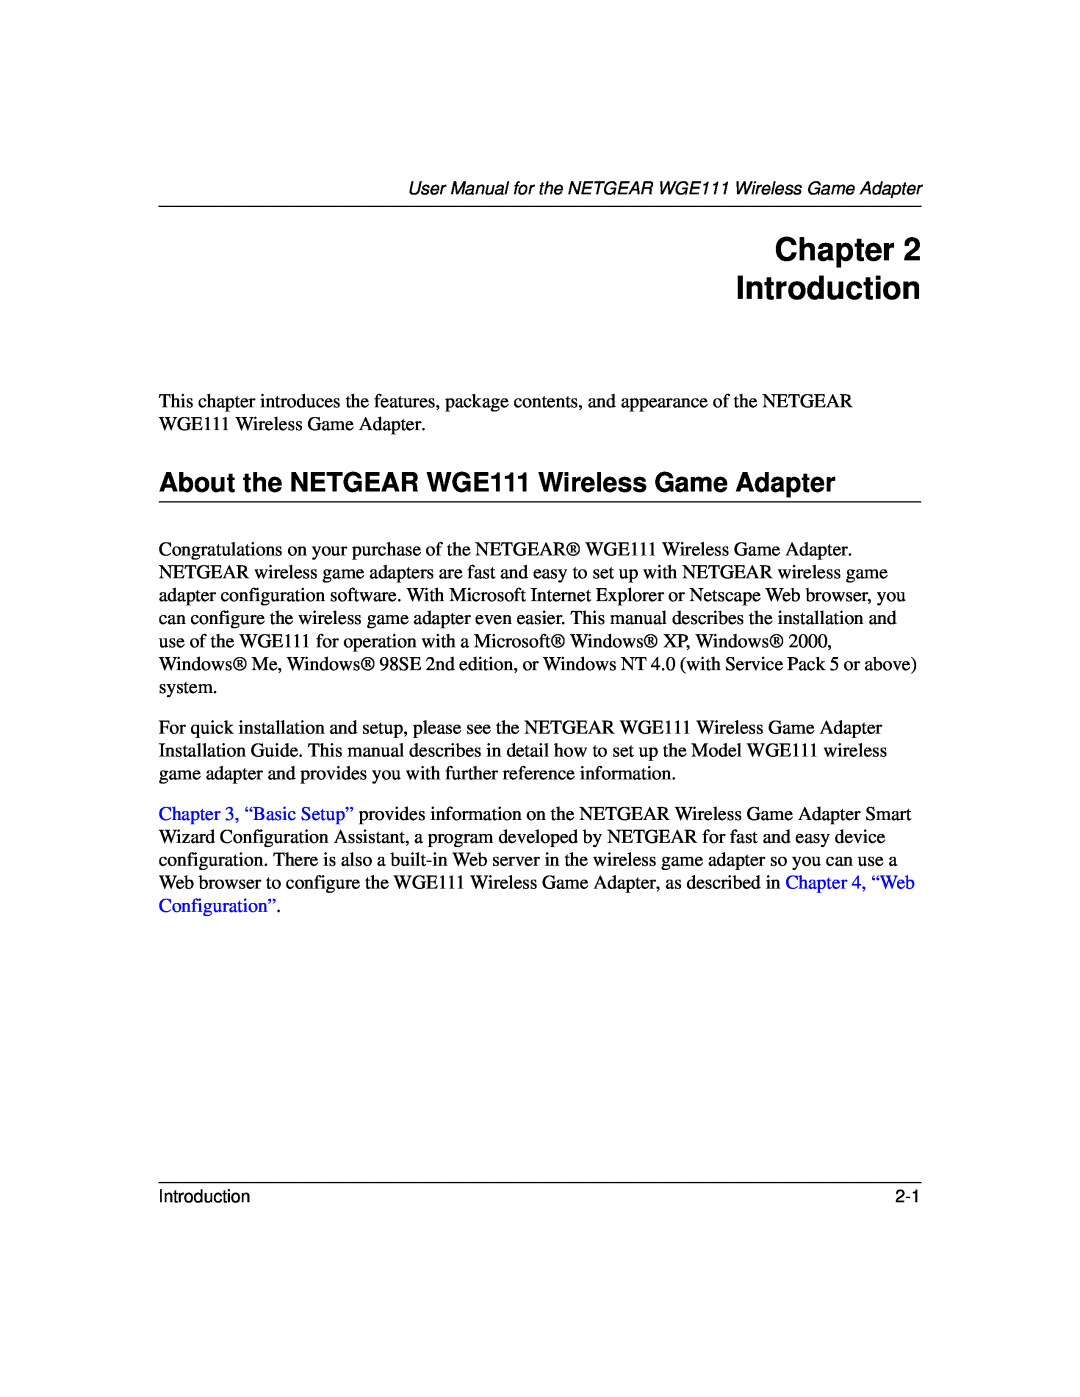 NETGEAR user manual Chapter Introduction, About the NETGEAR WGE111 Wireless Game Adapter 